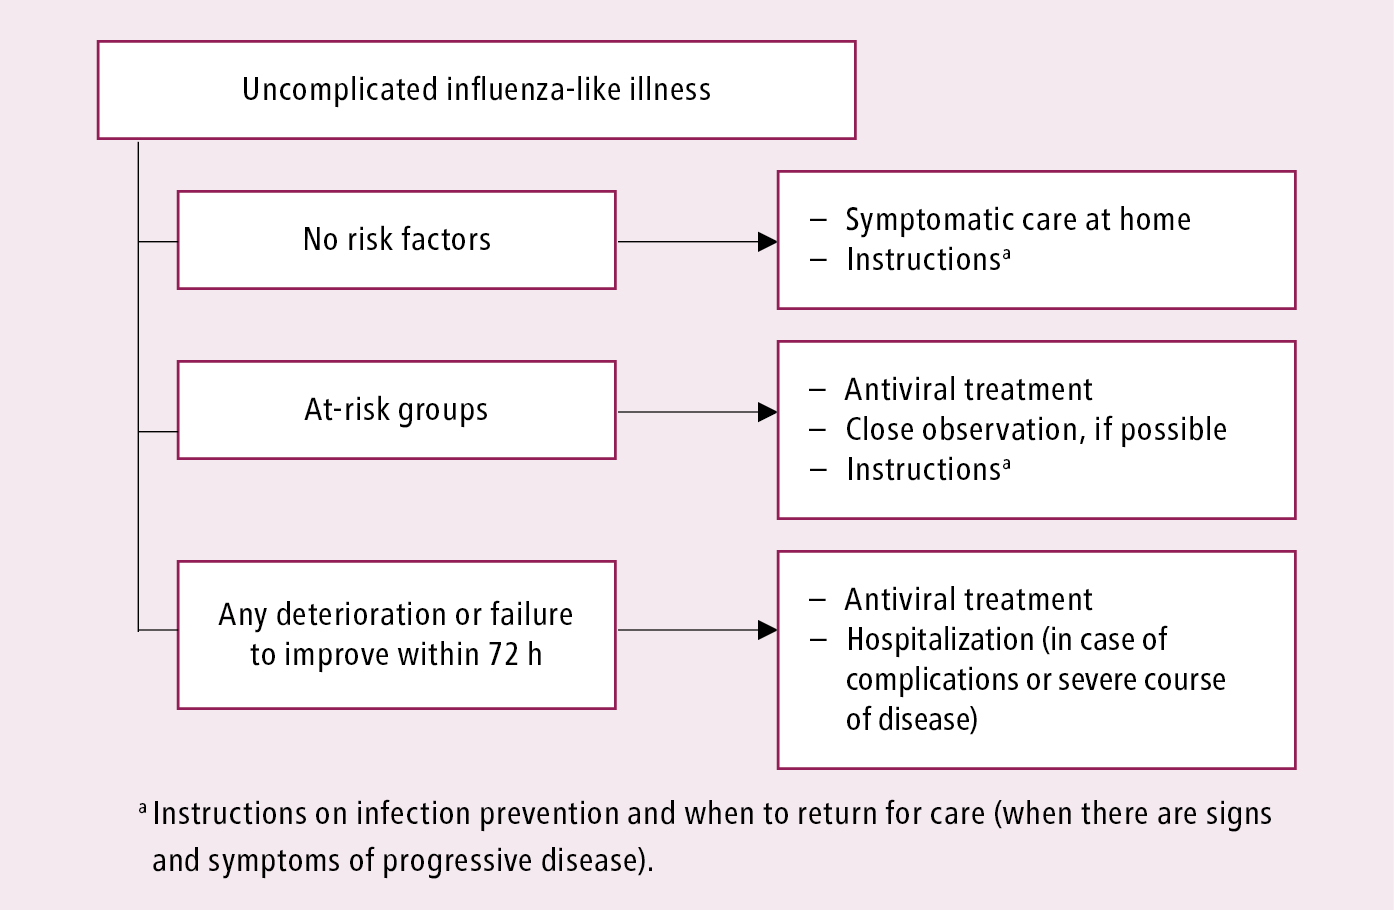 Figure 031_1_5606.  Initial clinical management of patients with uncomplicated influenza-like illness or influenza. See text for comments.  Based on the World Health Organization and Centers for Disease Control and Prevention guidelines.  